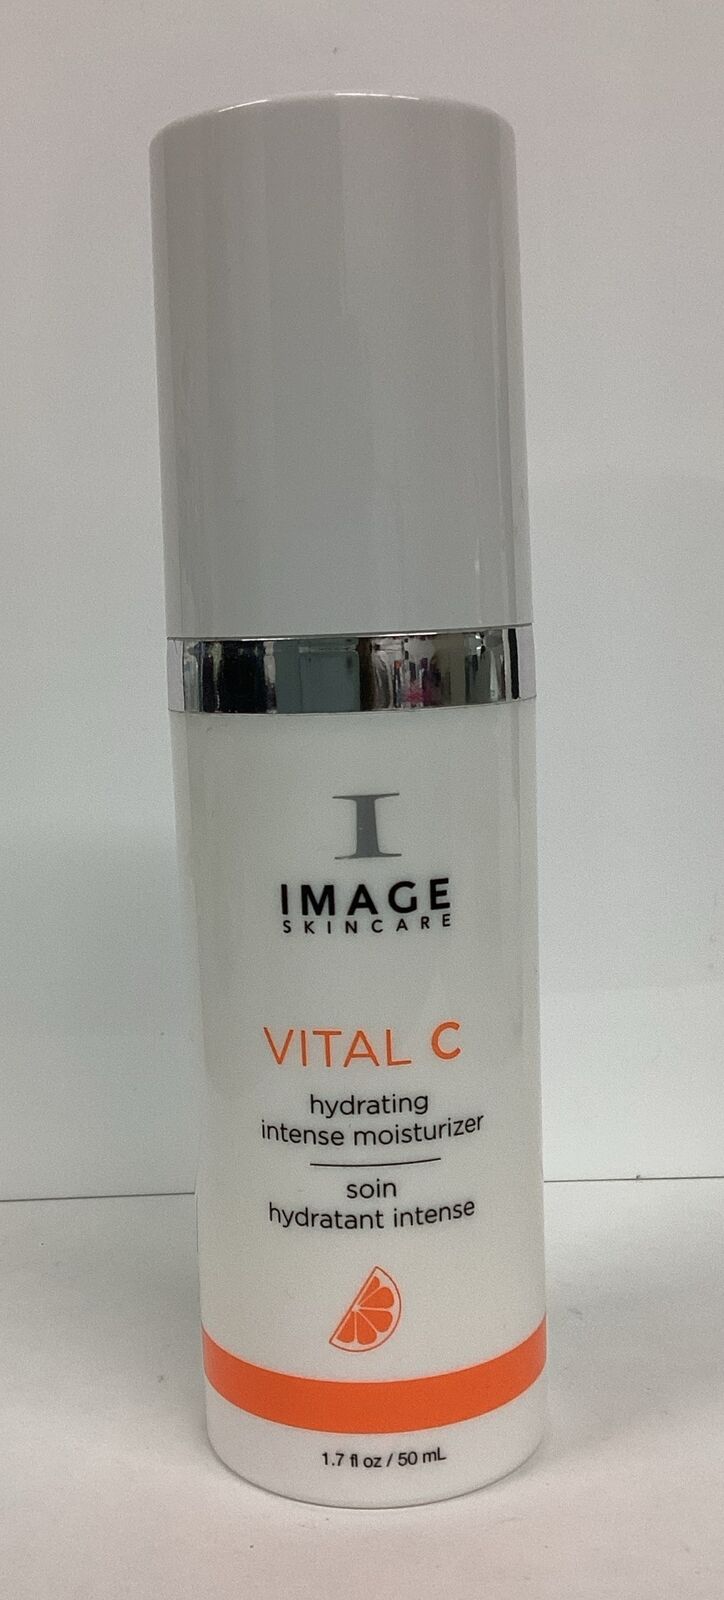 Vital C Hydrating Intense Moisturizer by Image Skincare 1.7oz As Pictured No Box